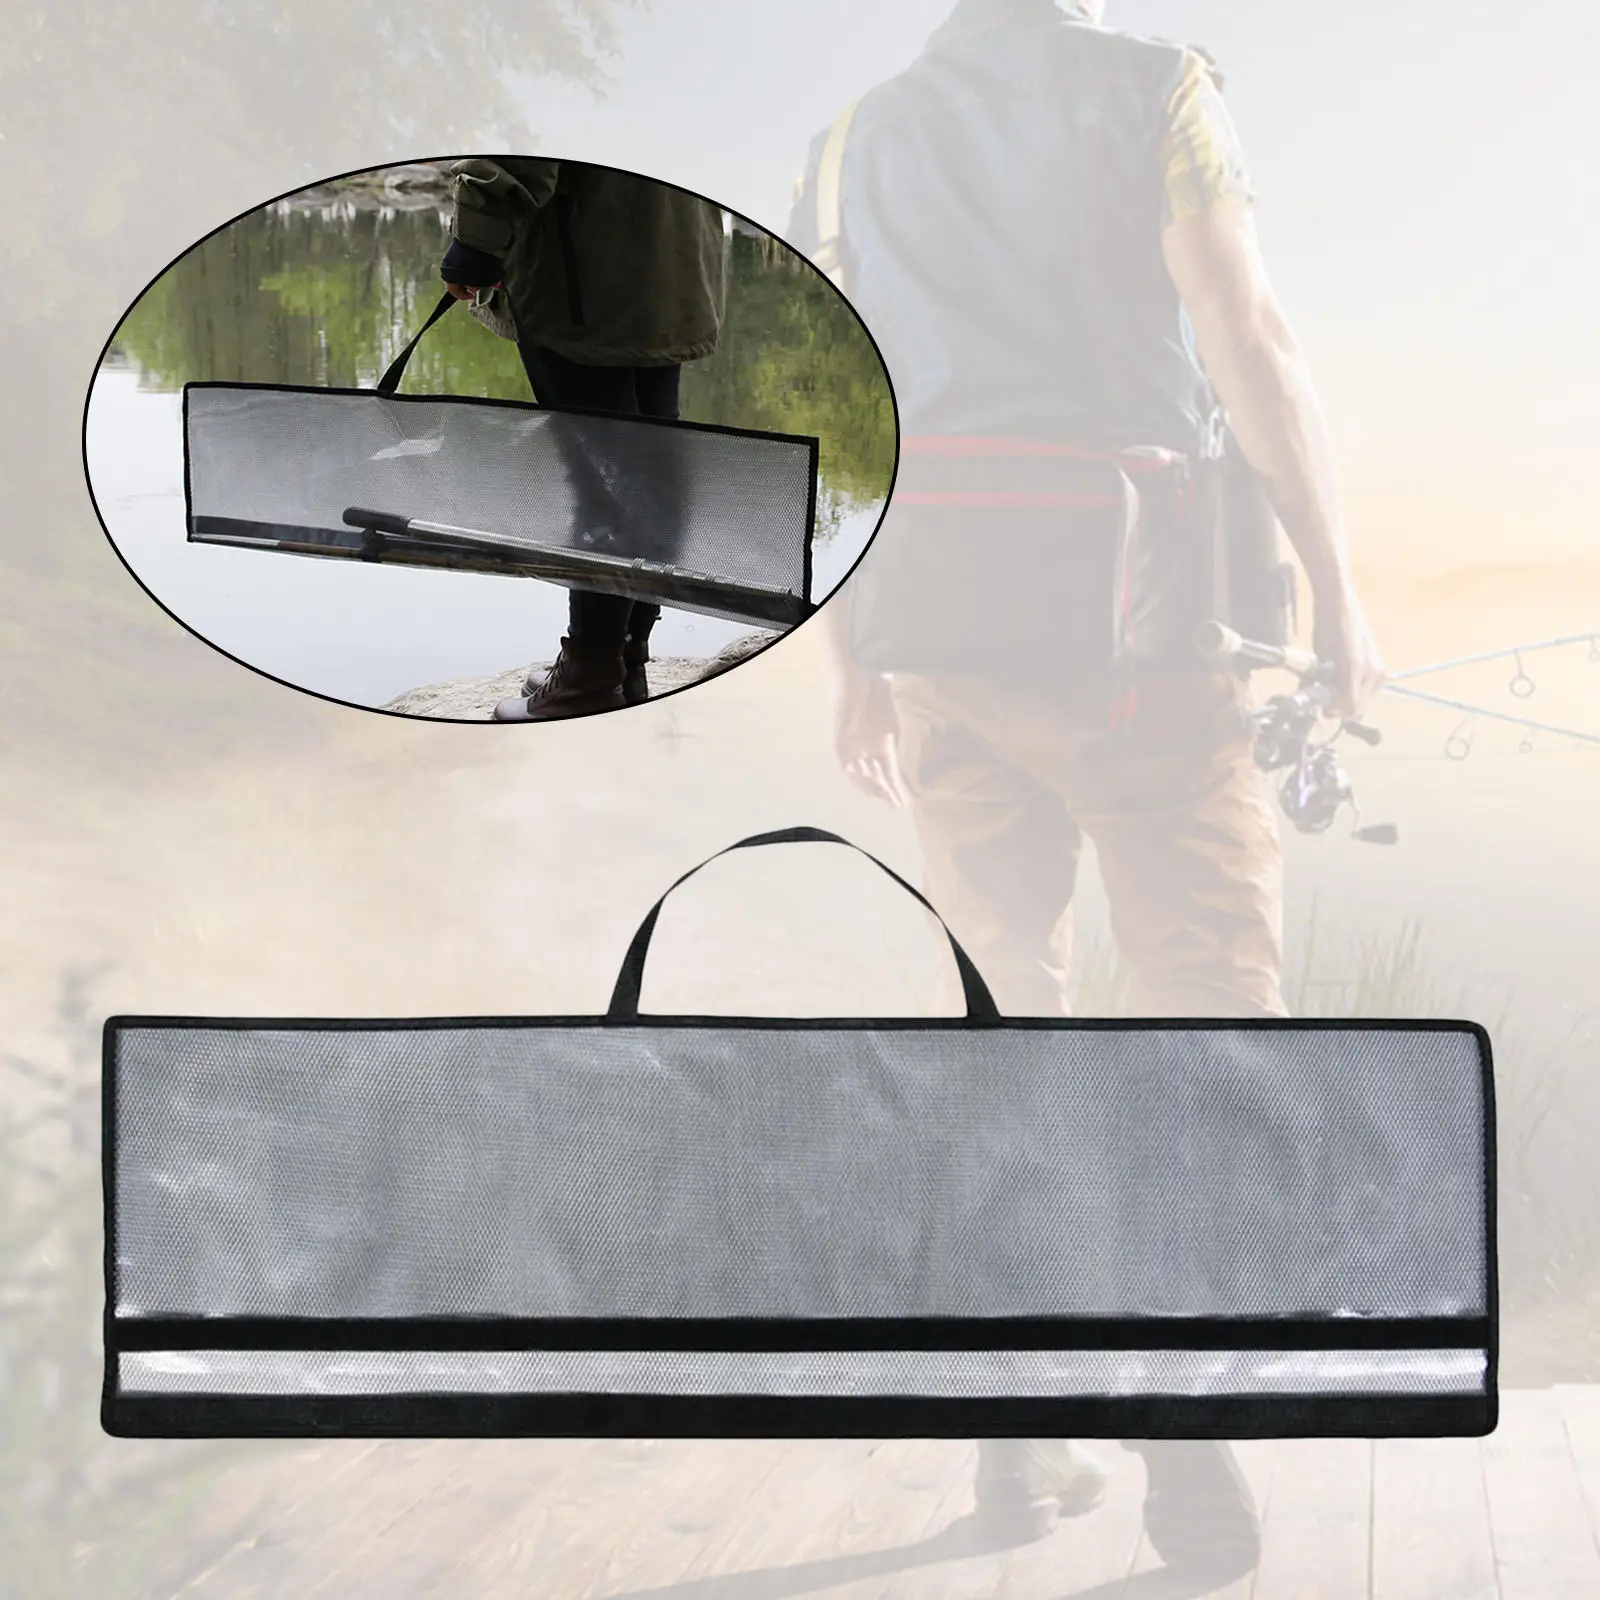 Outdoor Fishing Pole Bag PVC Clear Large Capacity Waterproof Foldable Multifunctional Portable Fishing Rod Case Carrier for Gift